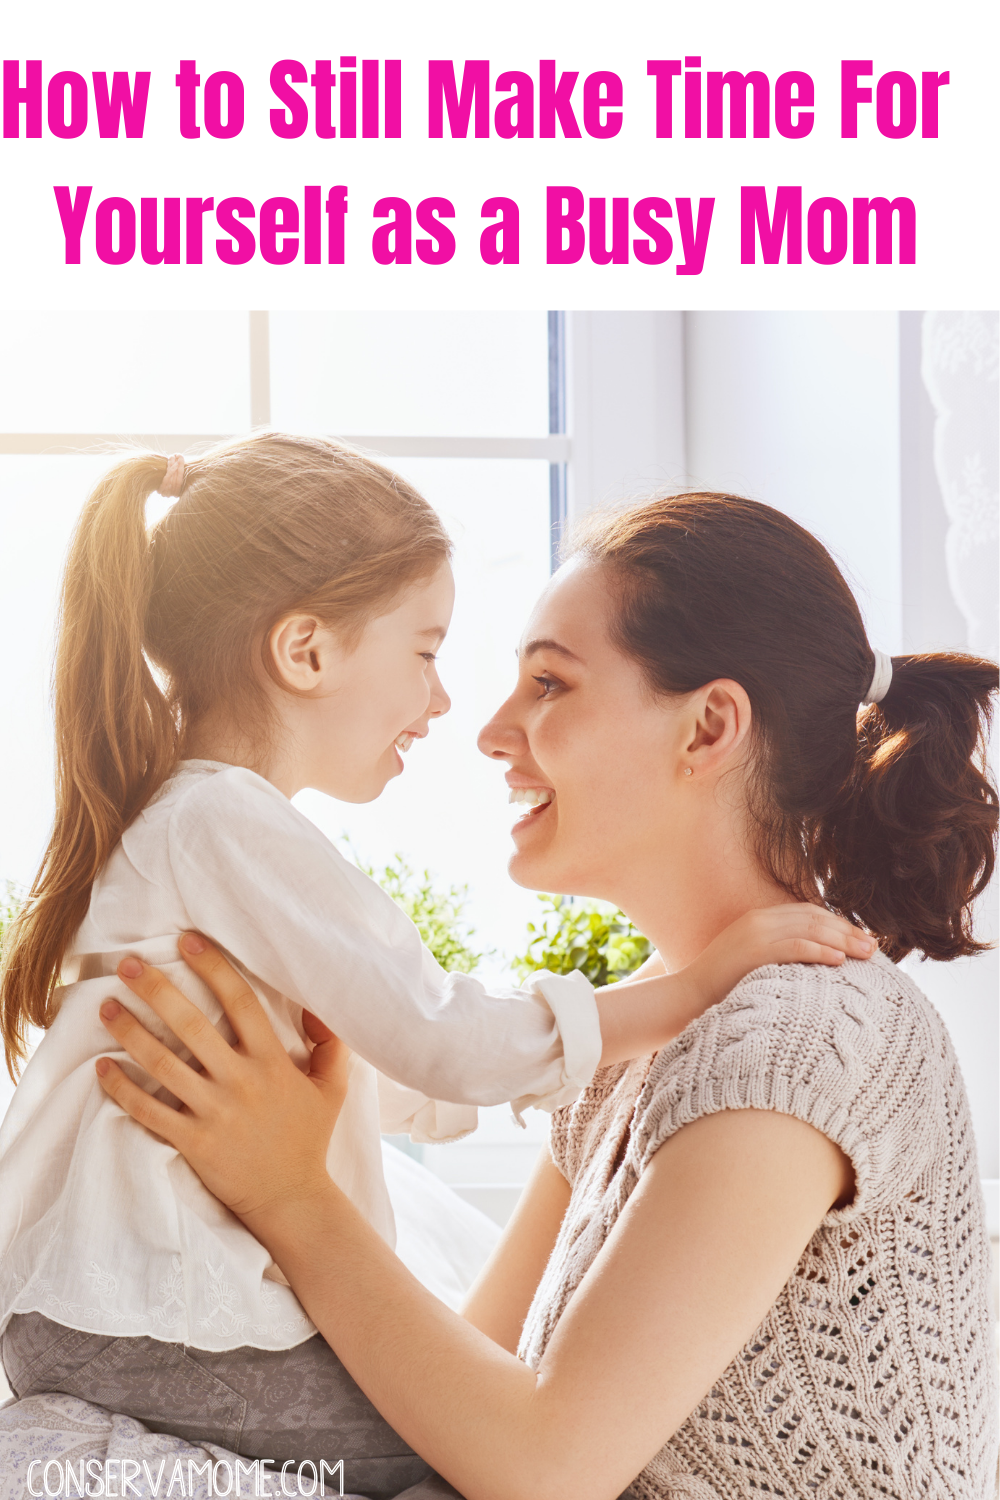 How to Still Make Time For Yourself as a Busy Mom